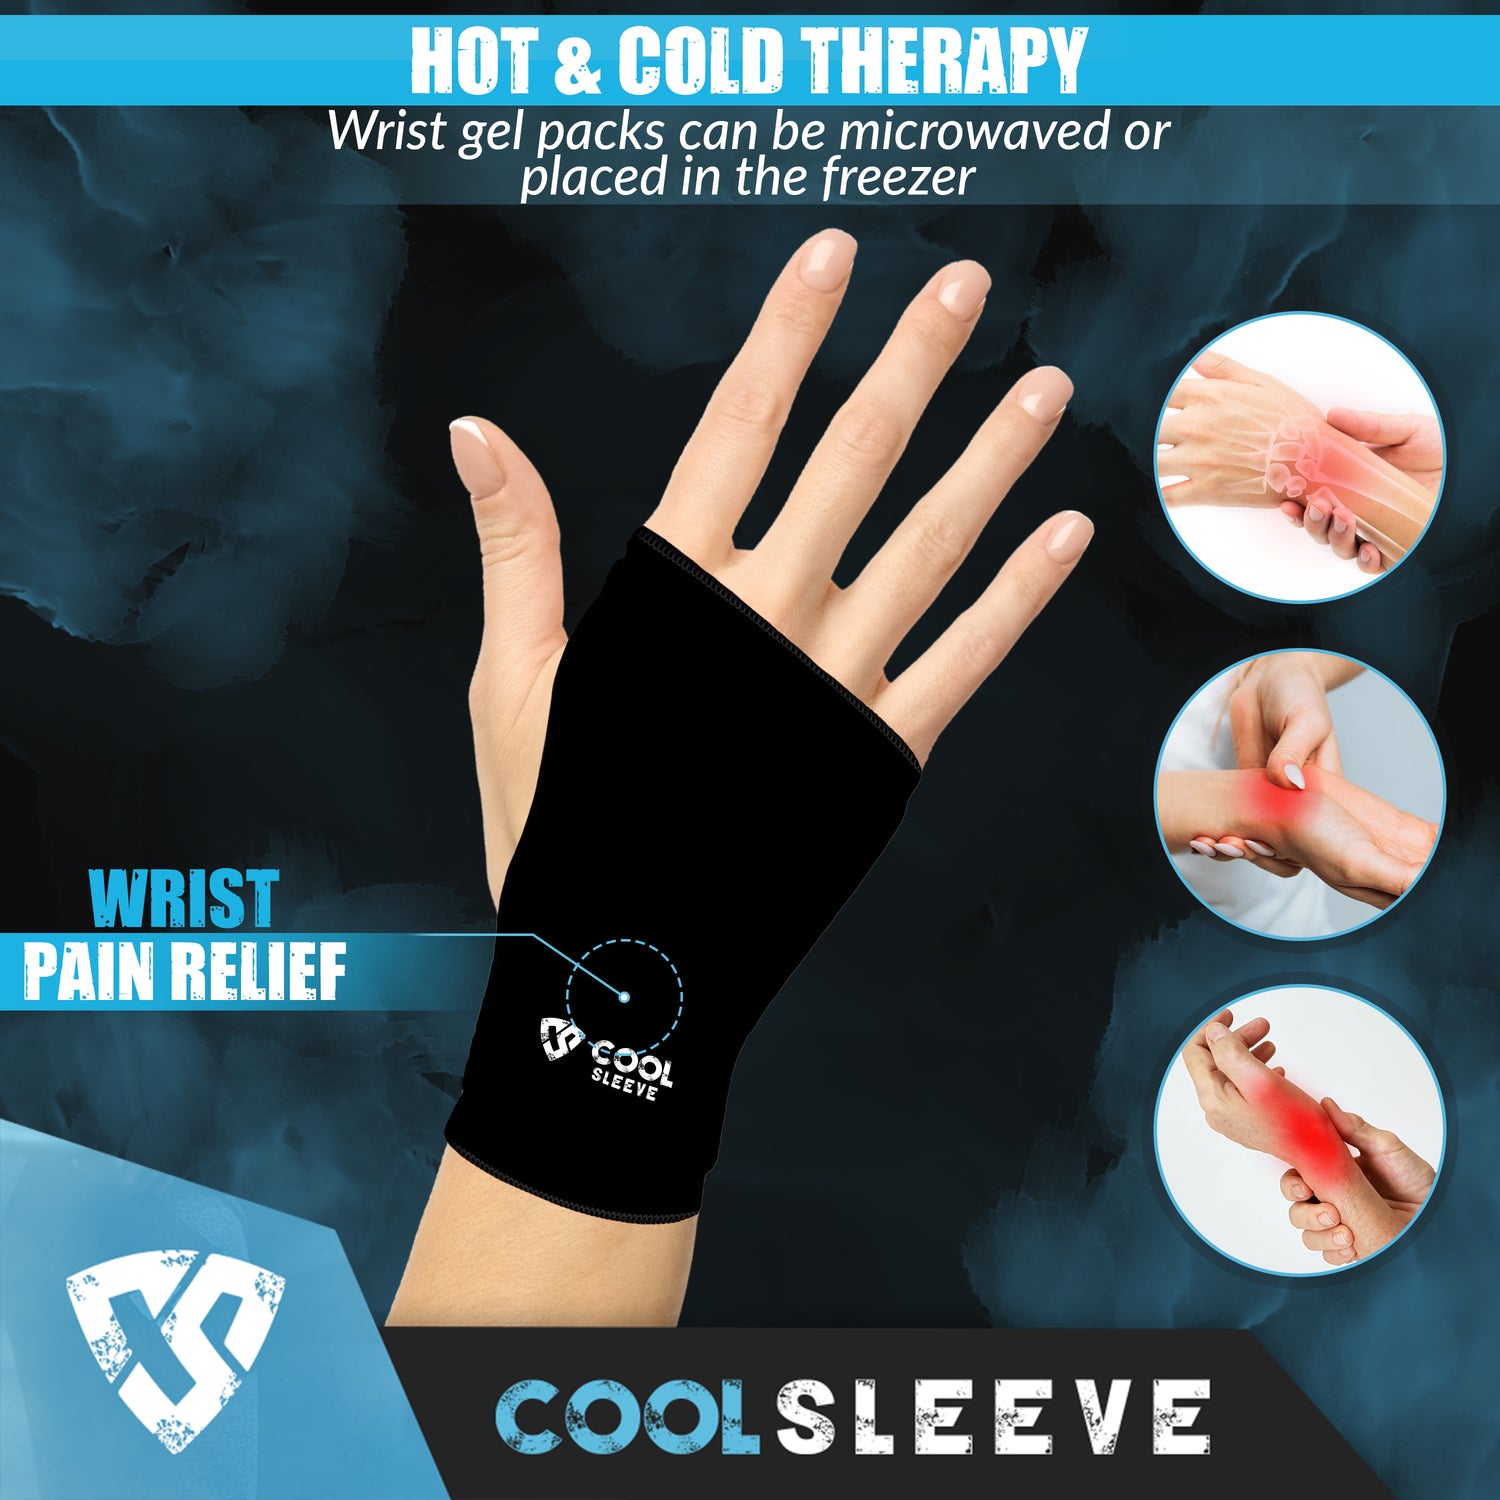 Wrist sleeve for pain relief